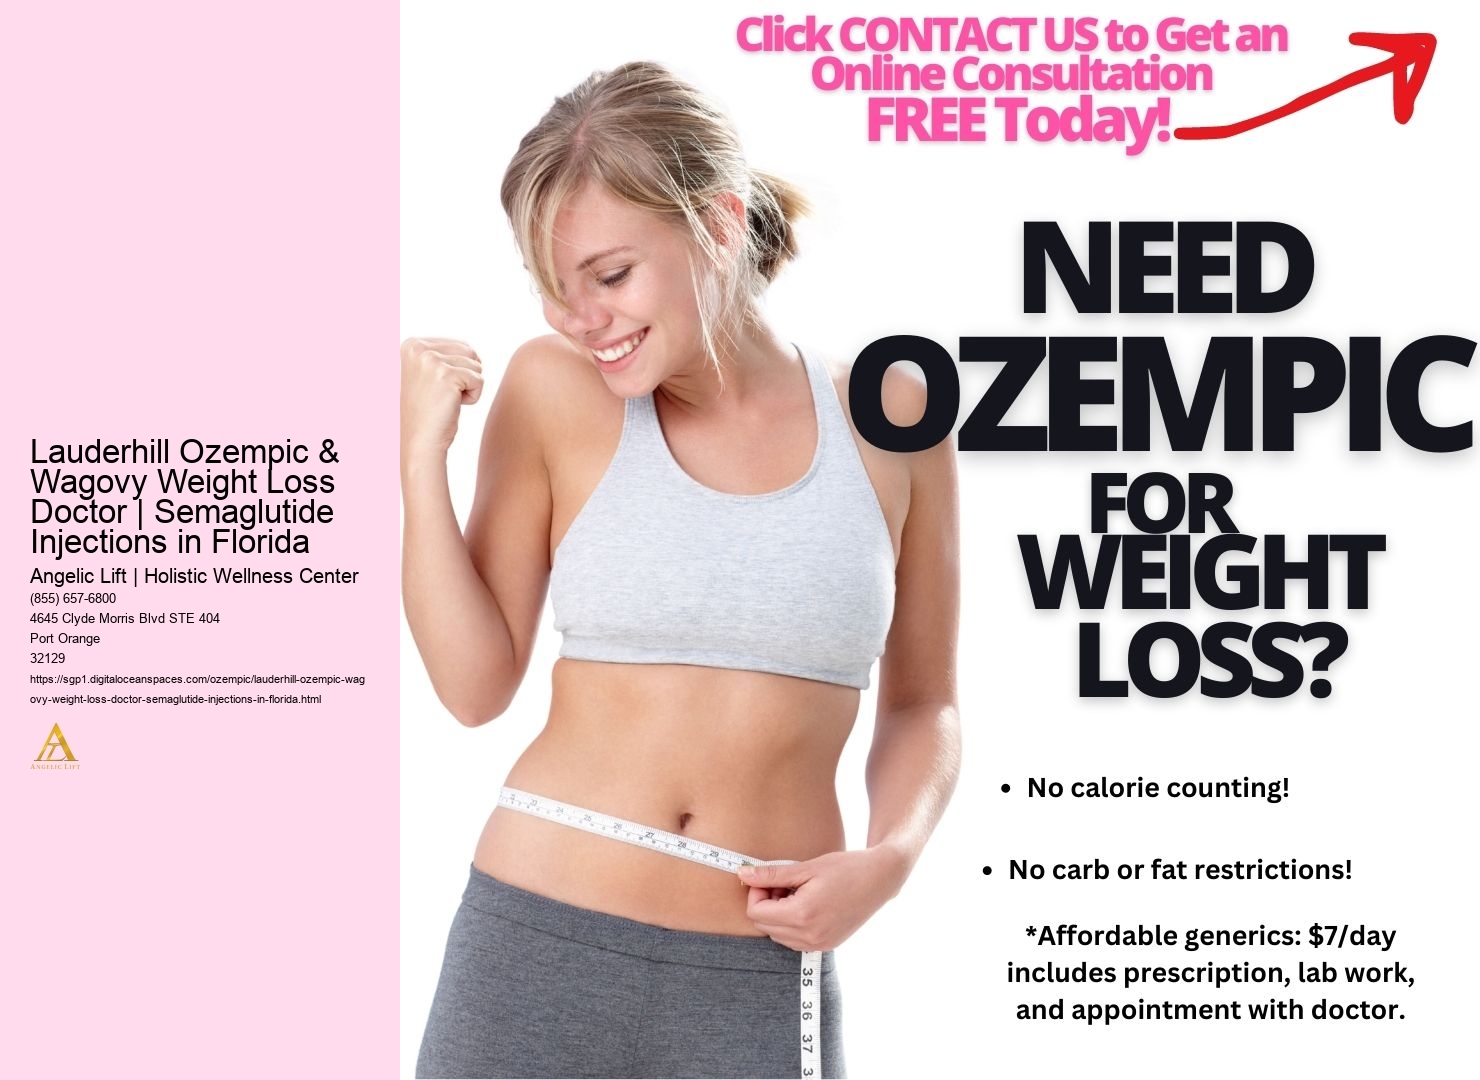 Lauderhill Ozempic & Wagovy Weight Loss Doctor | Semaglutide Injections in Florida